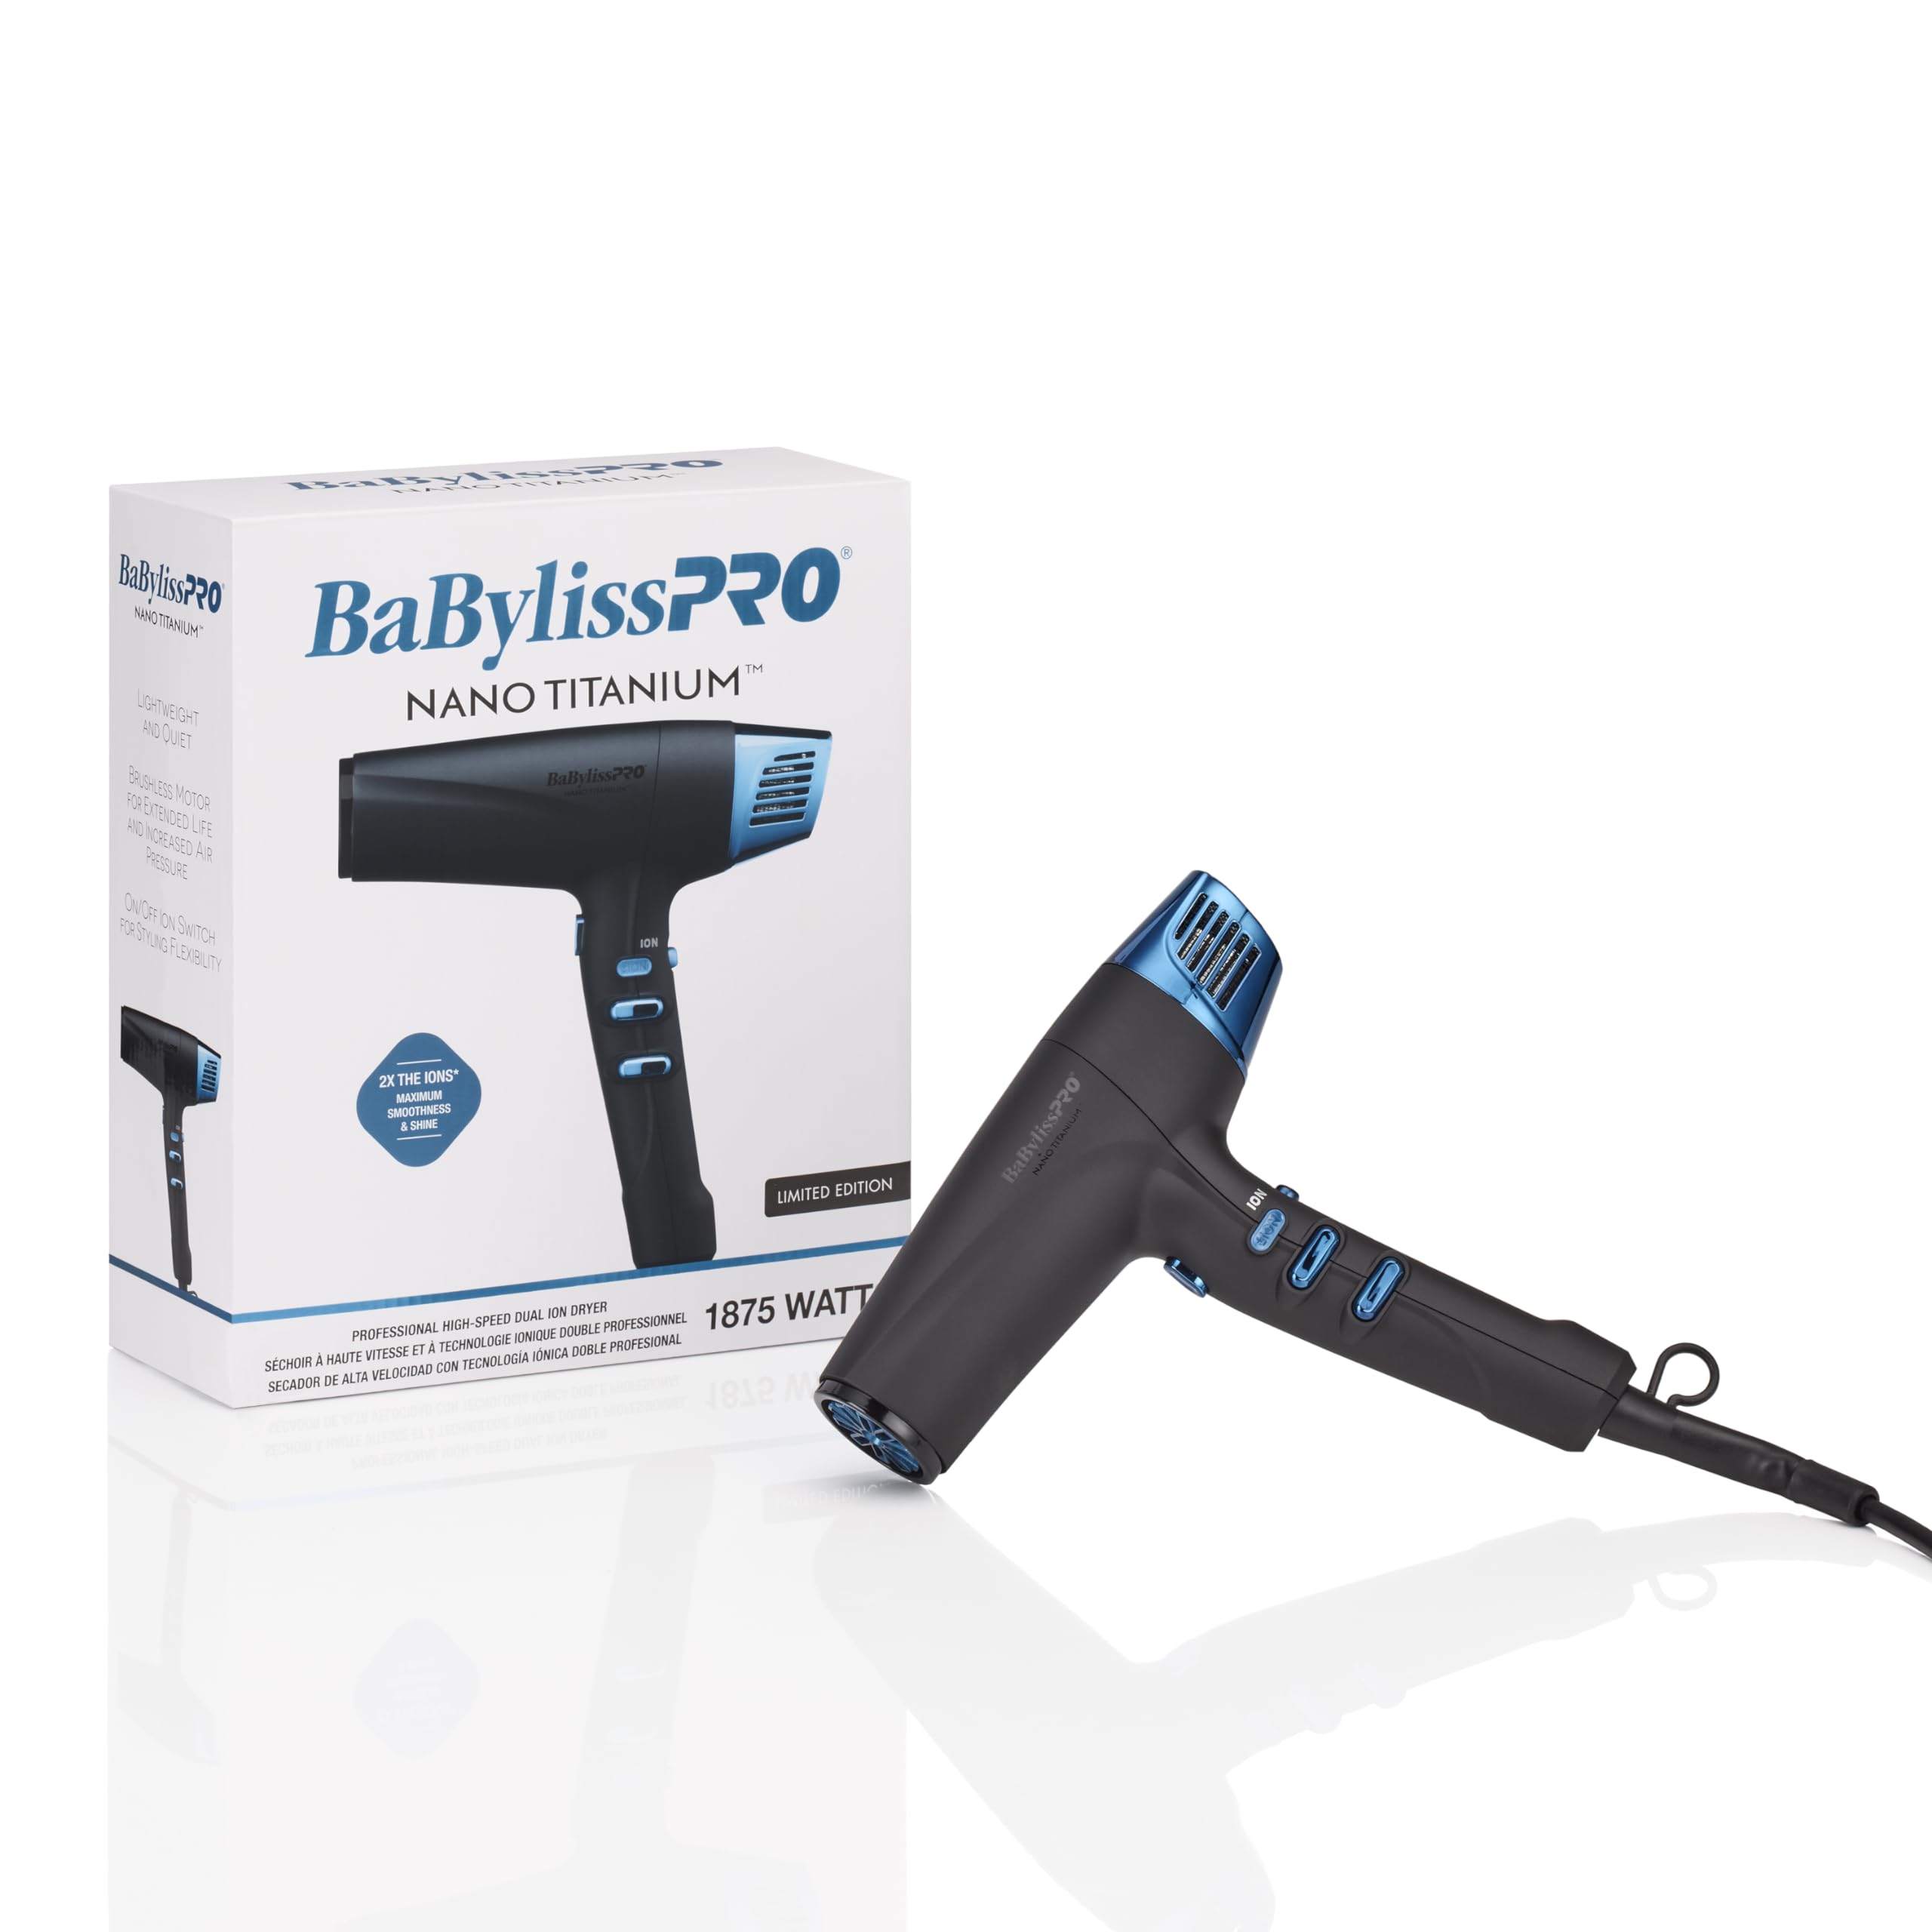 BaBylissPRO Nano Titanium Hair Dryer, Professional 2000-Watt Blow Dryer, Ionic Technology Dries Hair Faster With Less Frizz